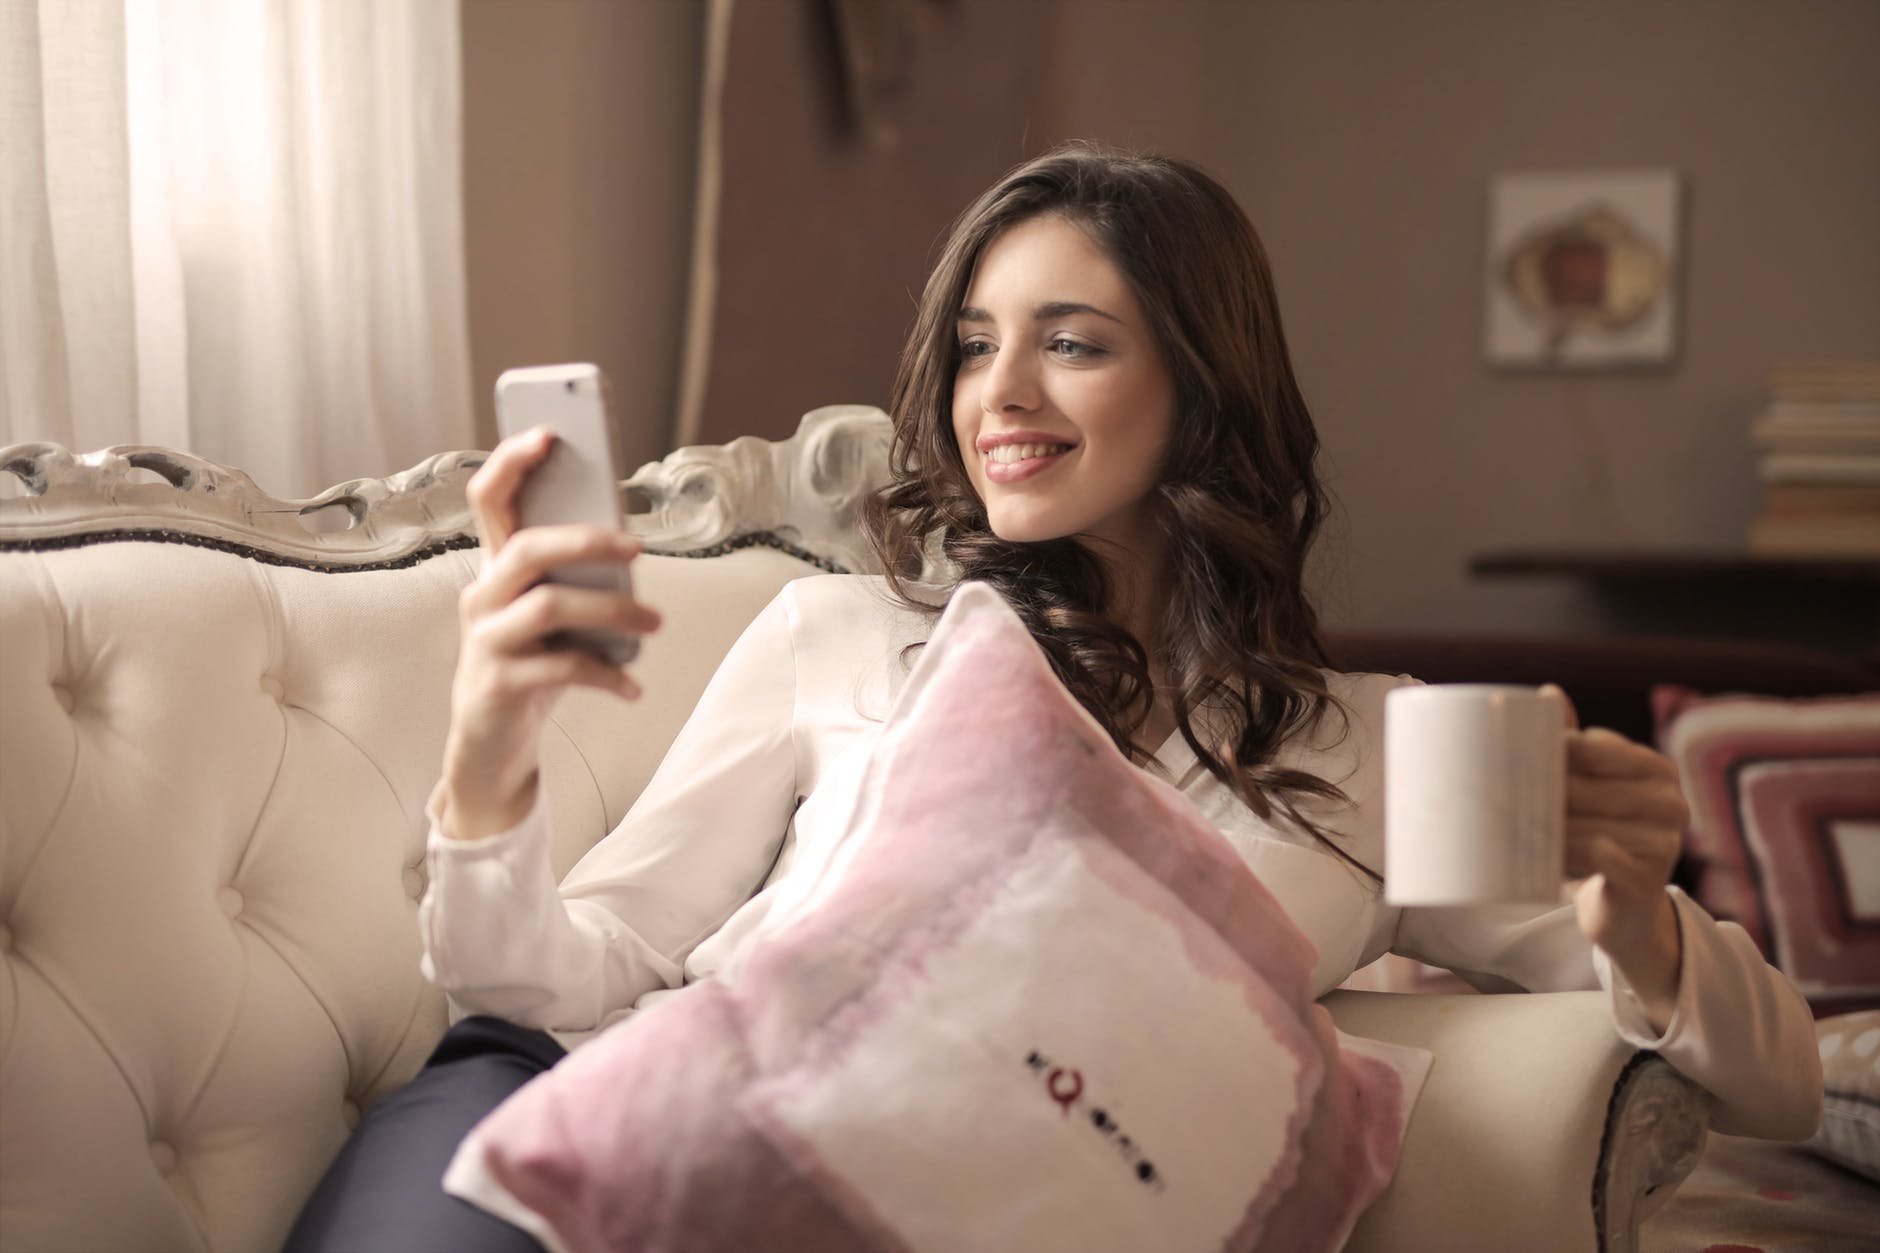 woman in white long sleeved shirt holding smartphone sitting on tufted sofa